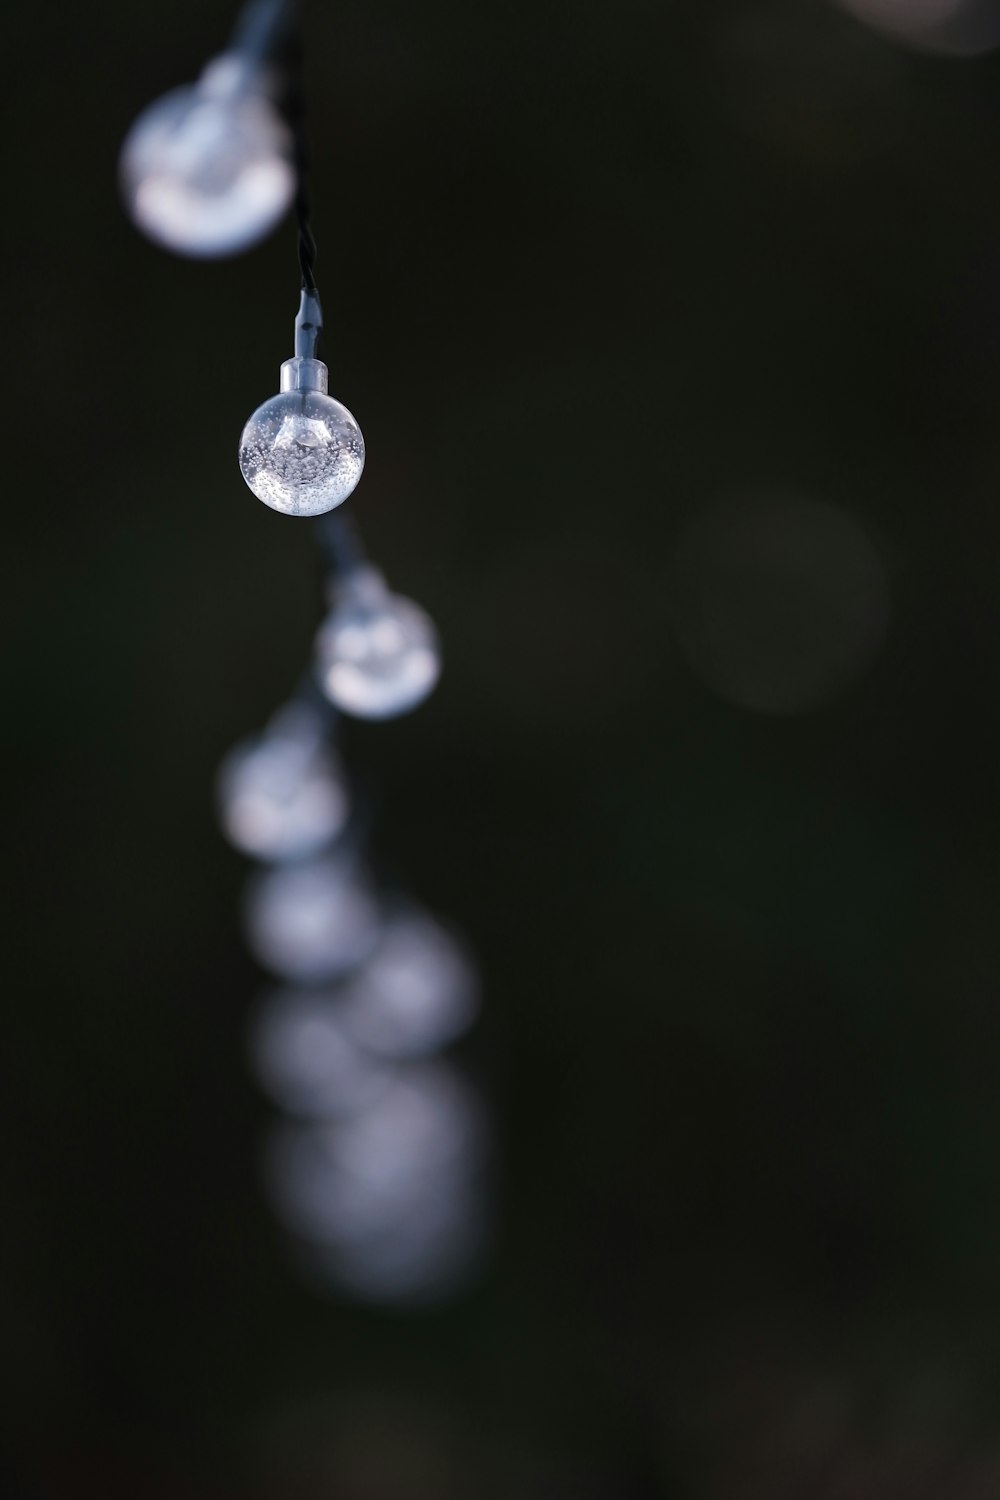 drops of water hanging from a line of lights